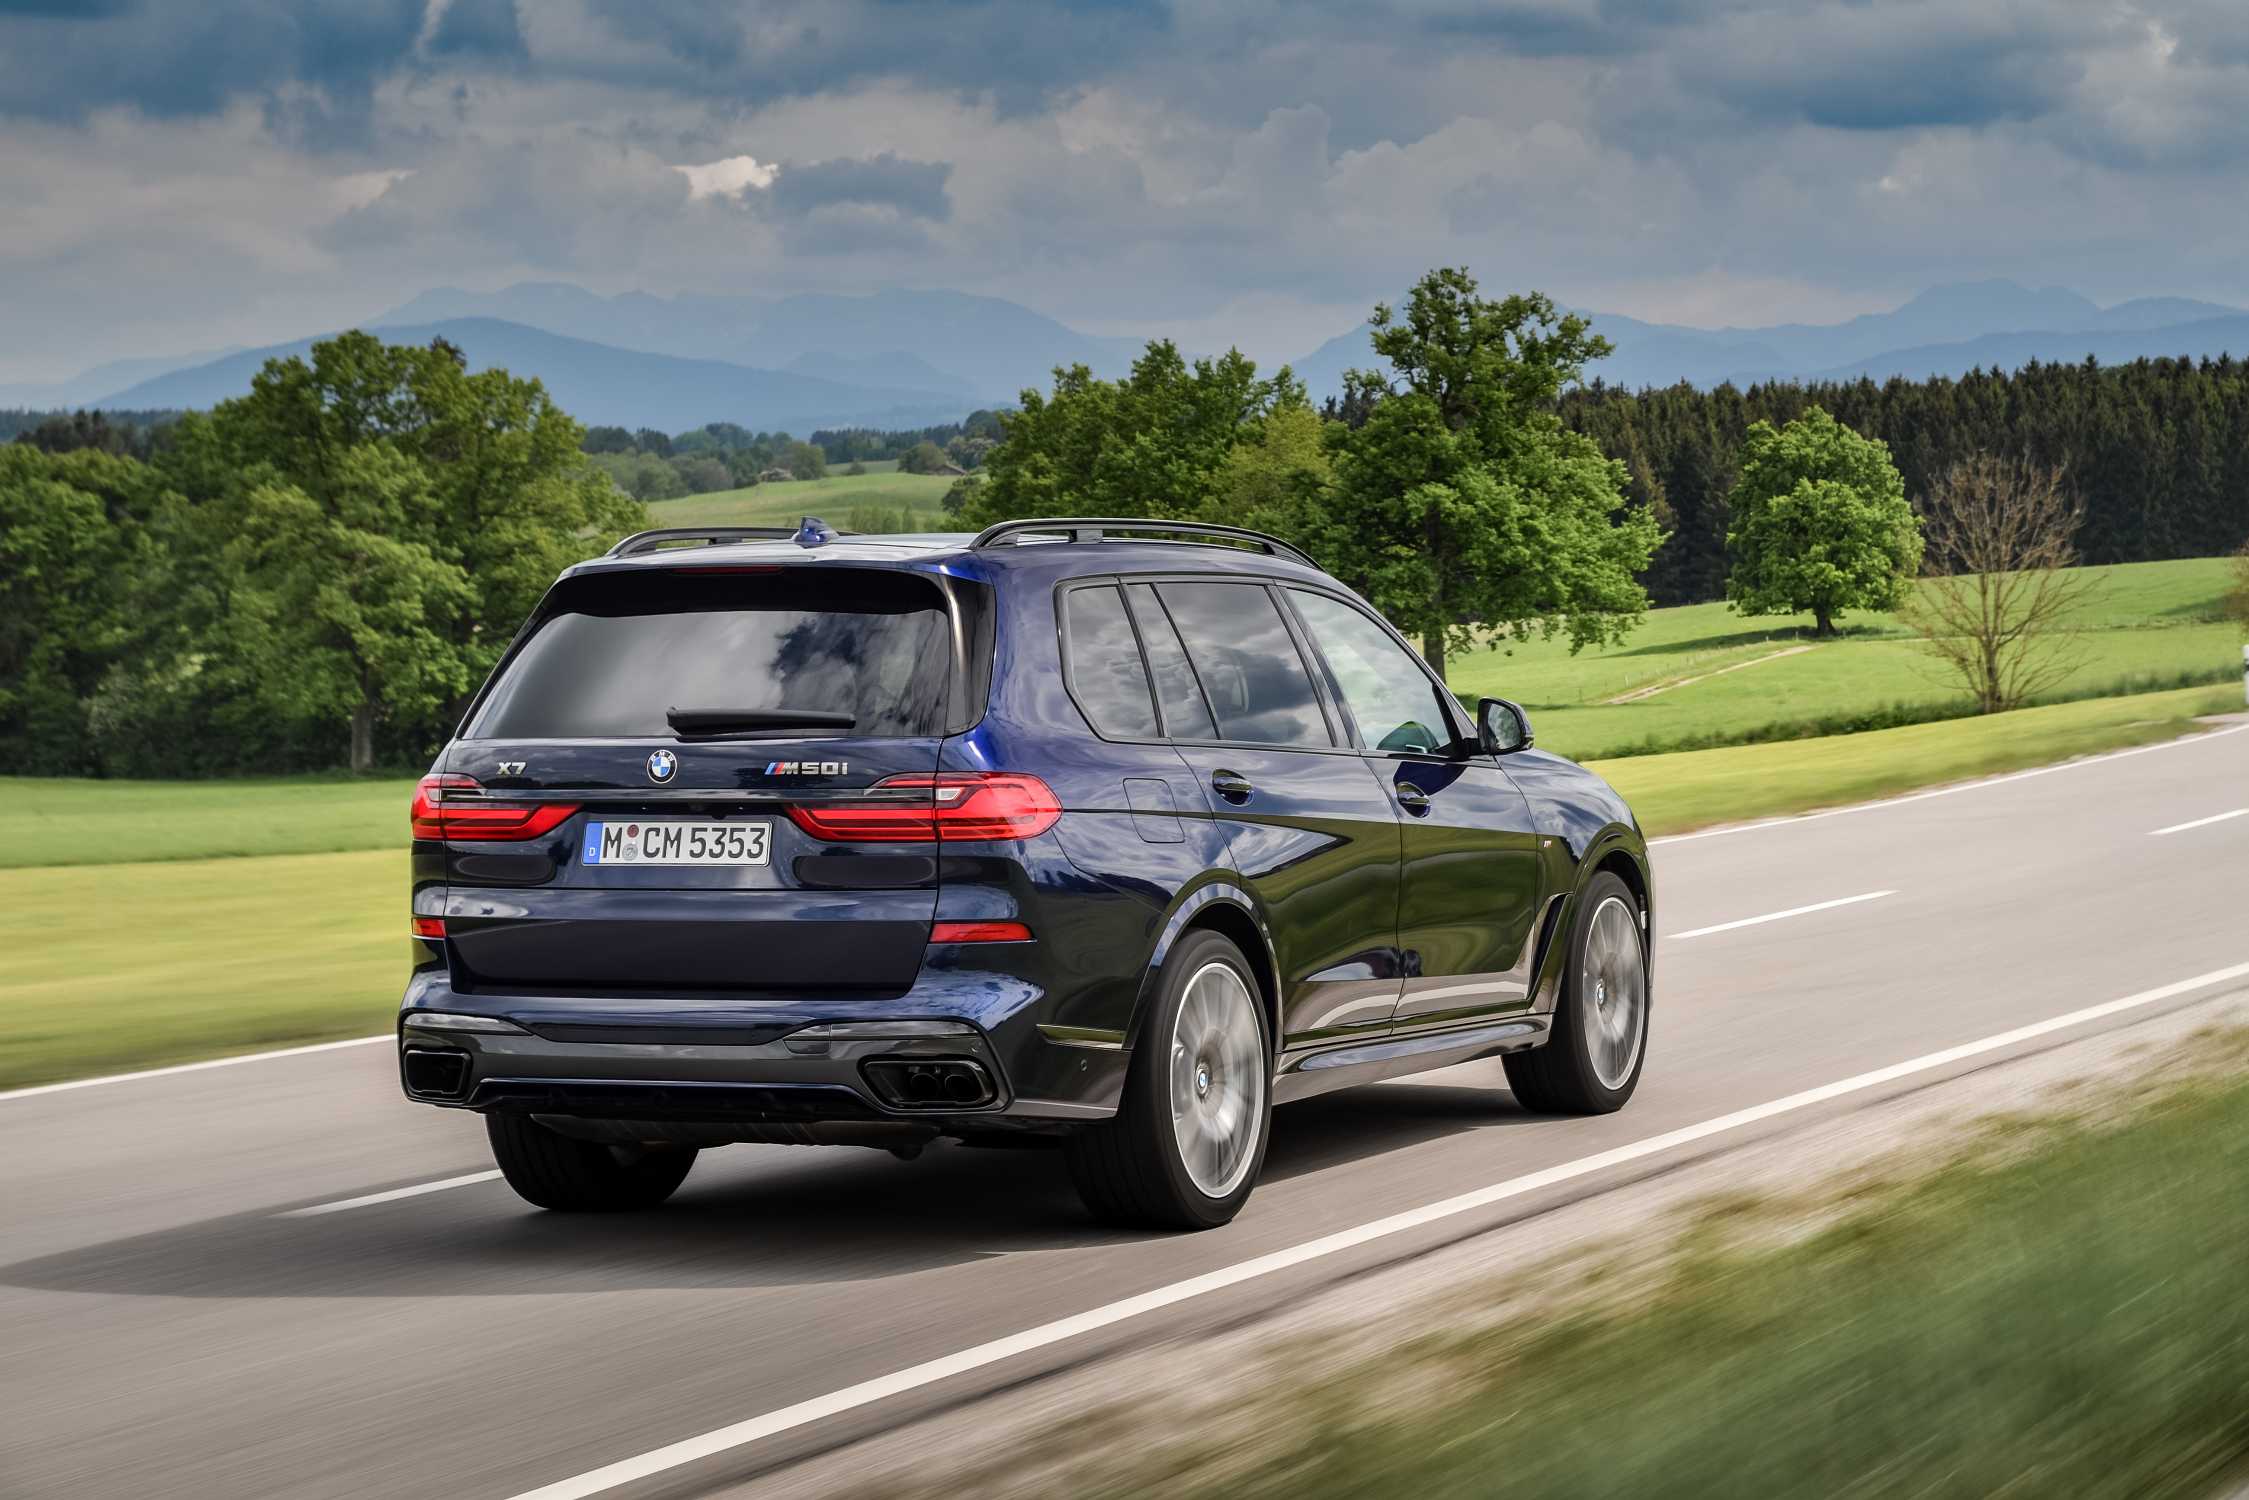 The new BMW X7 M50i (05/2020).